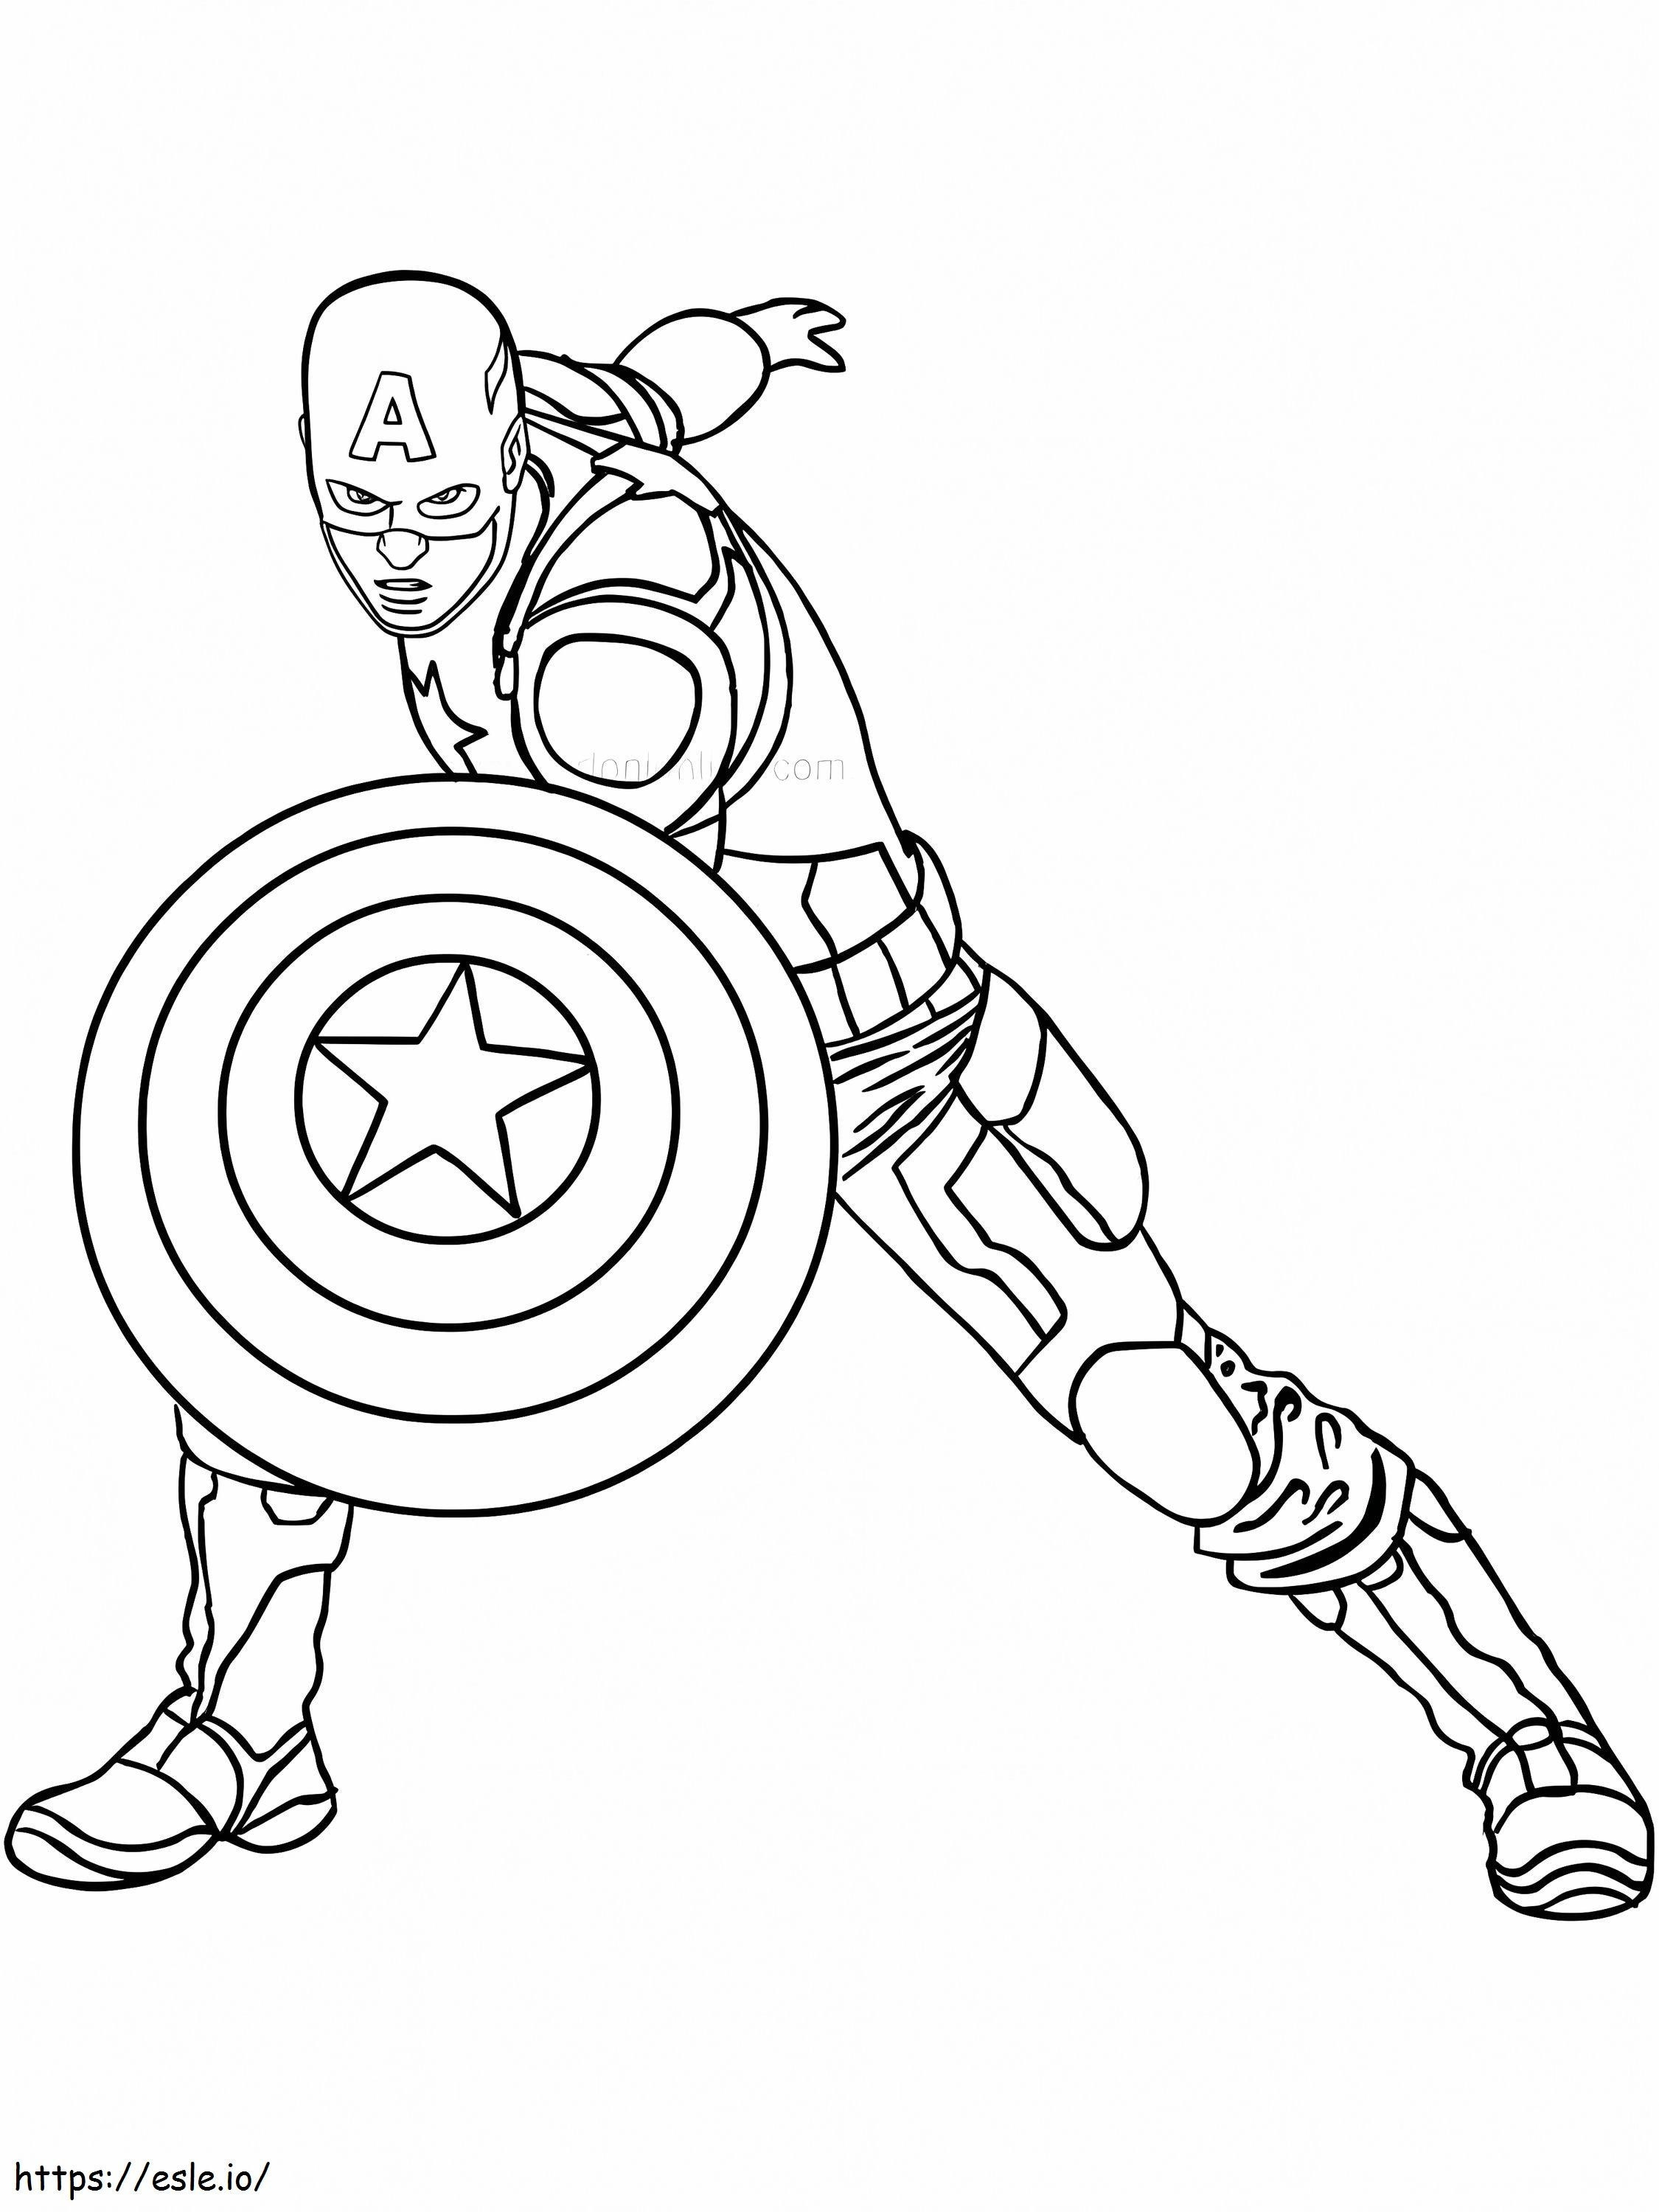 Captain America Is Strong coloring page